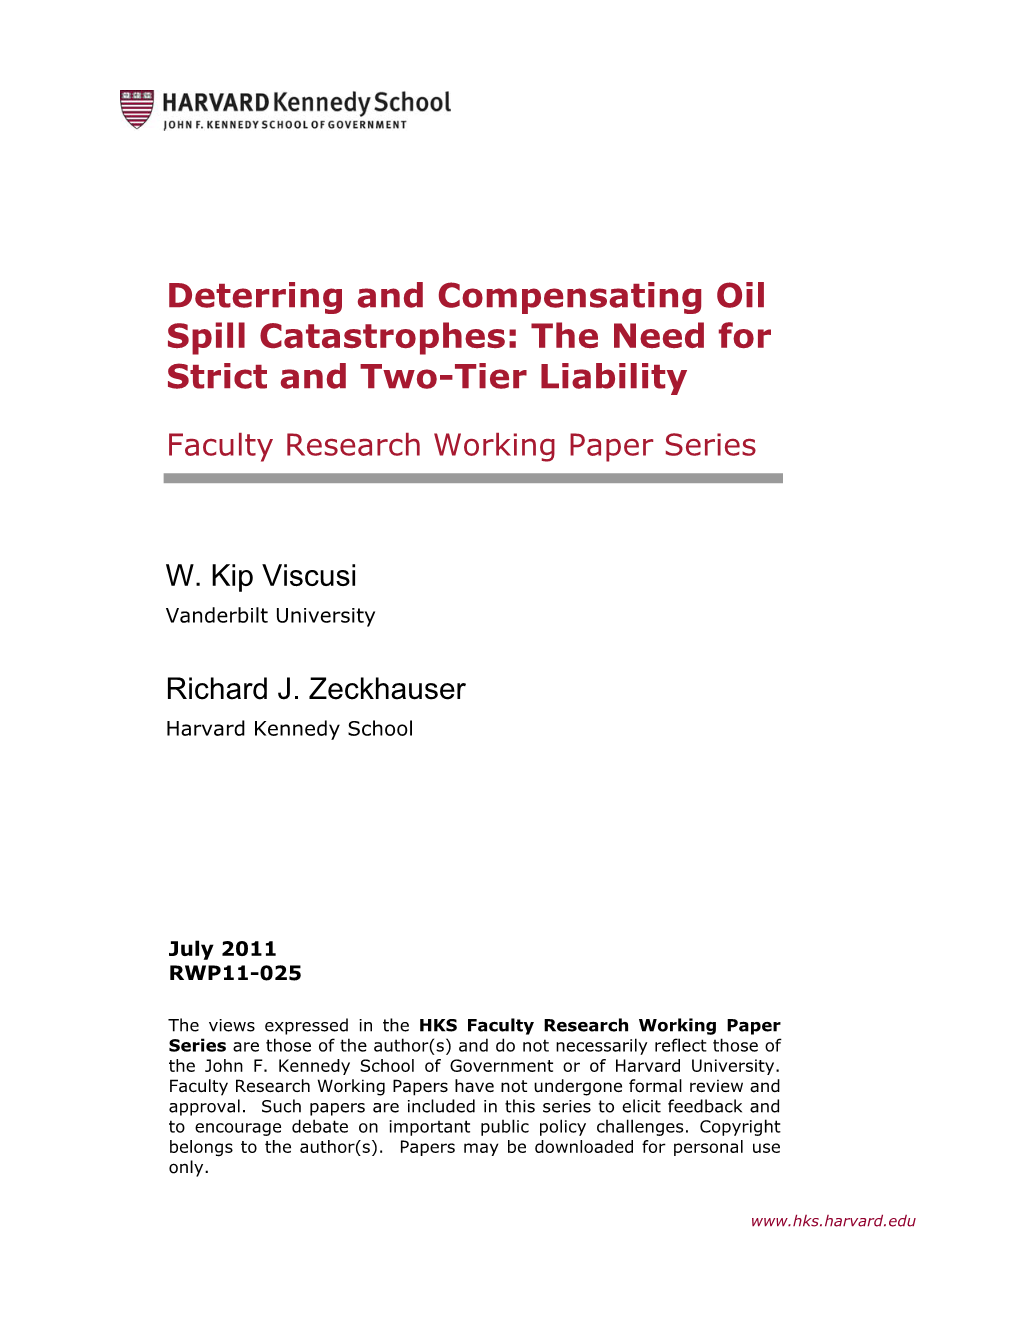 Deterring and Compensating Oil Spill Catastrophes: the Need for Strict and Two-Tier Liability